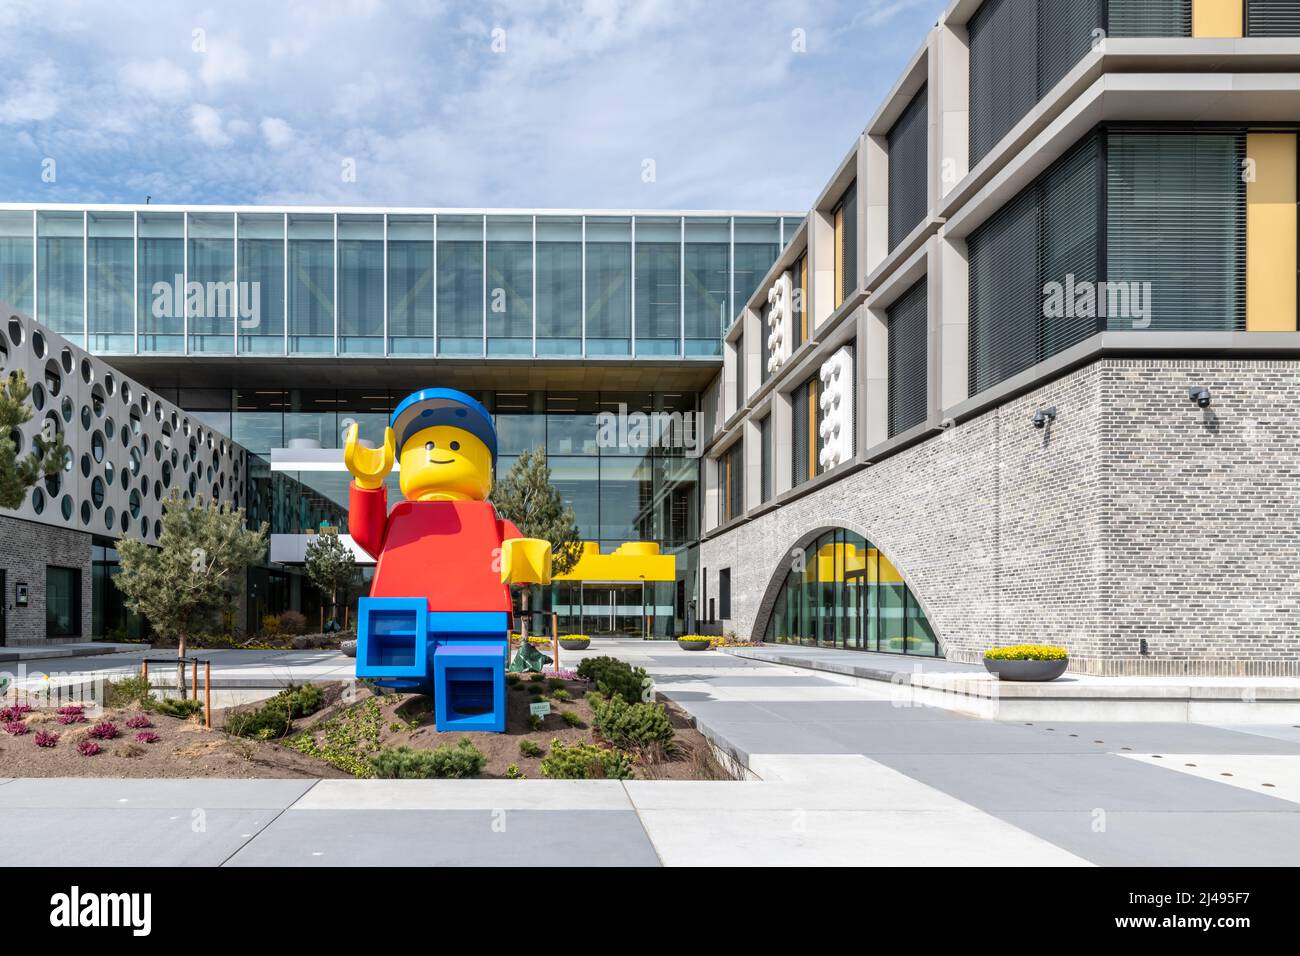 Meget sur Perfervid Hjælp Billund, Denmark. 12th Apr, 2022. Outside the recently opened LEGO® Campus  Buildings in Billund, Denmark including a very large Lego minifigure.  Credit: Thomas Faull/Alamy Live News Stock Photo - Alamy